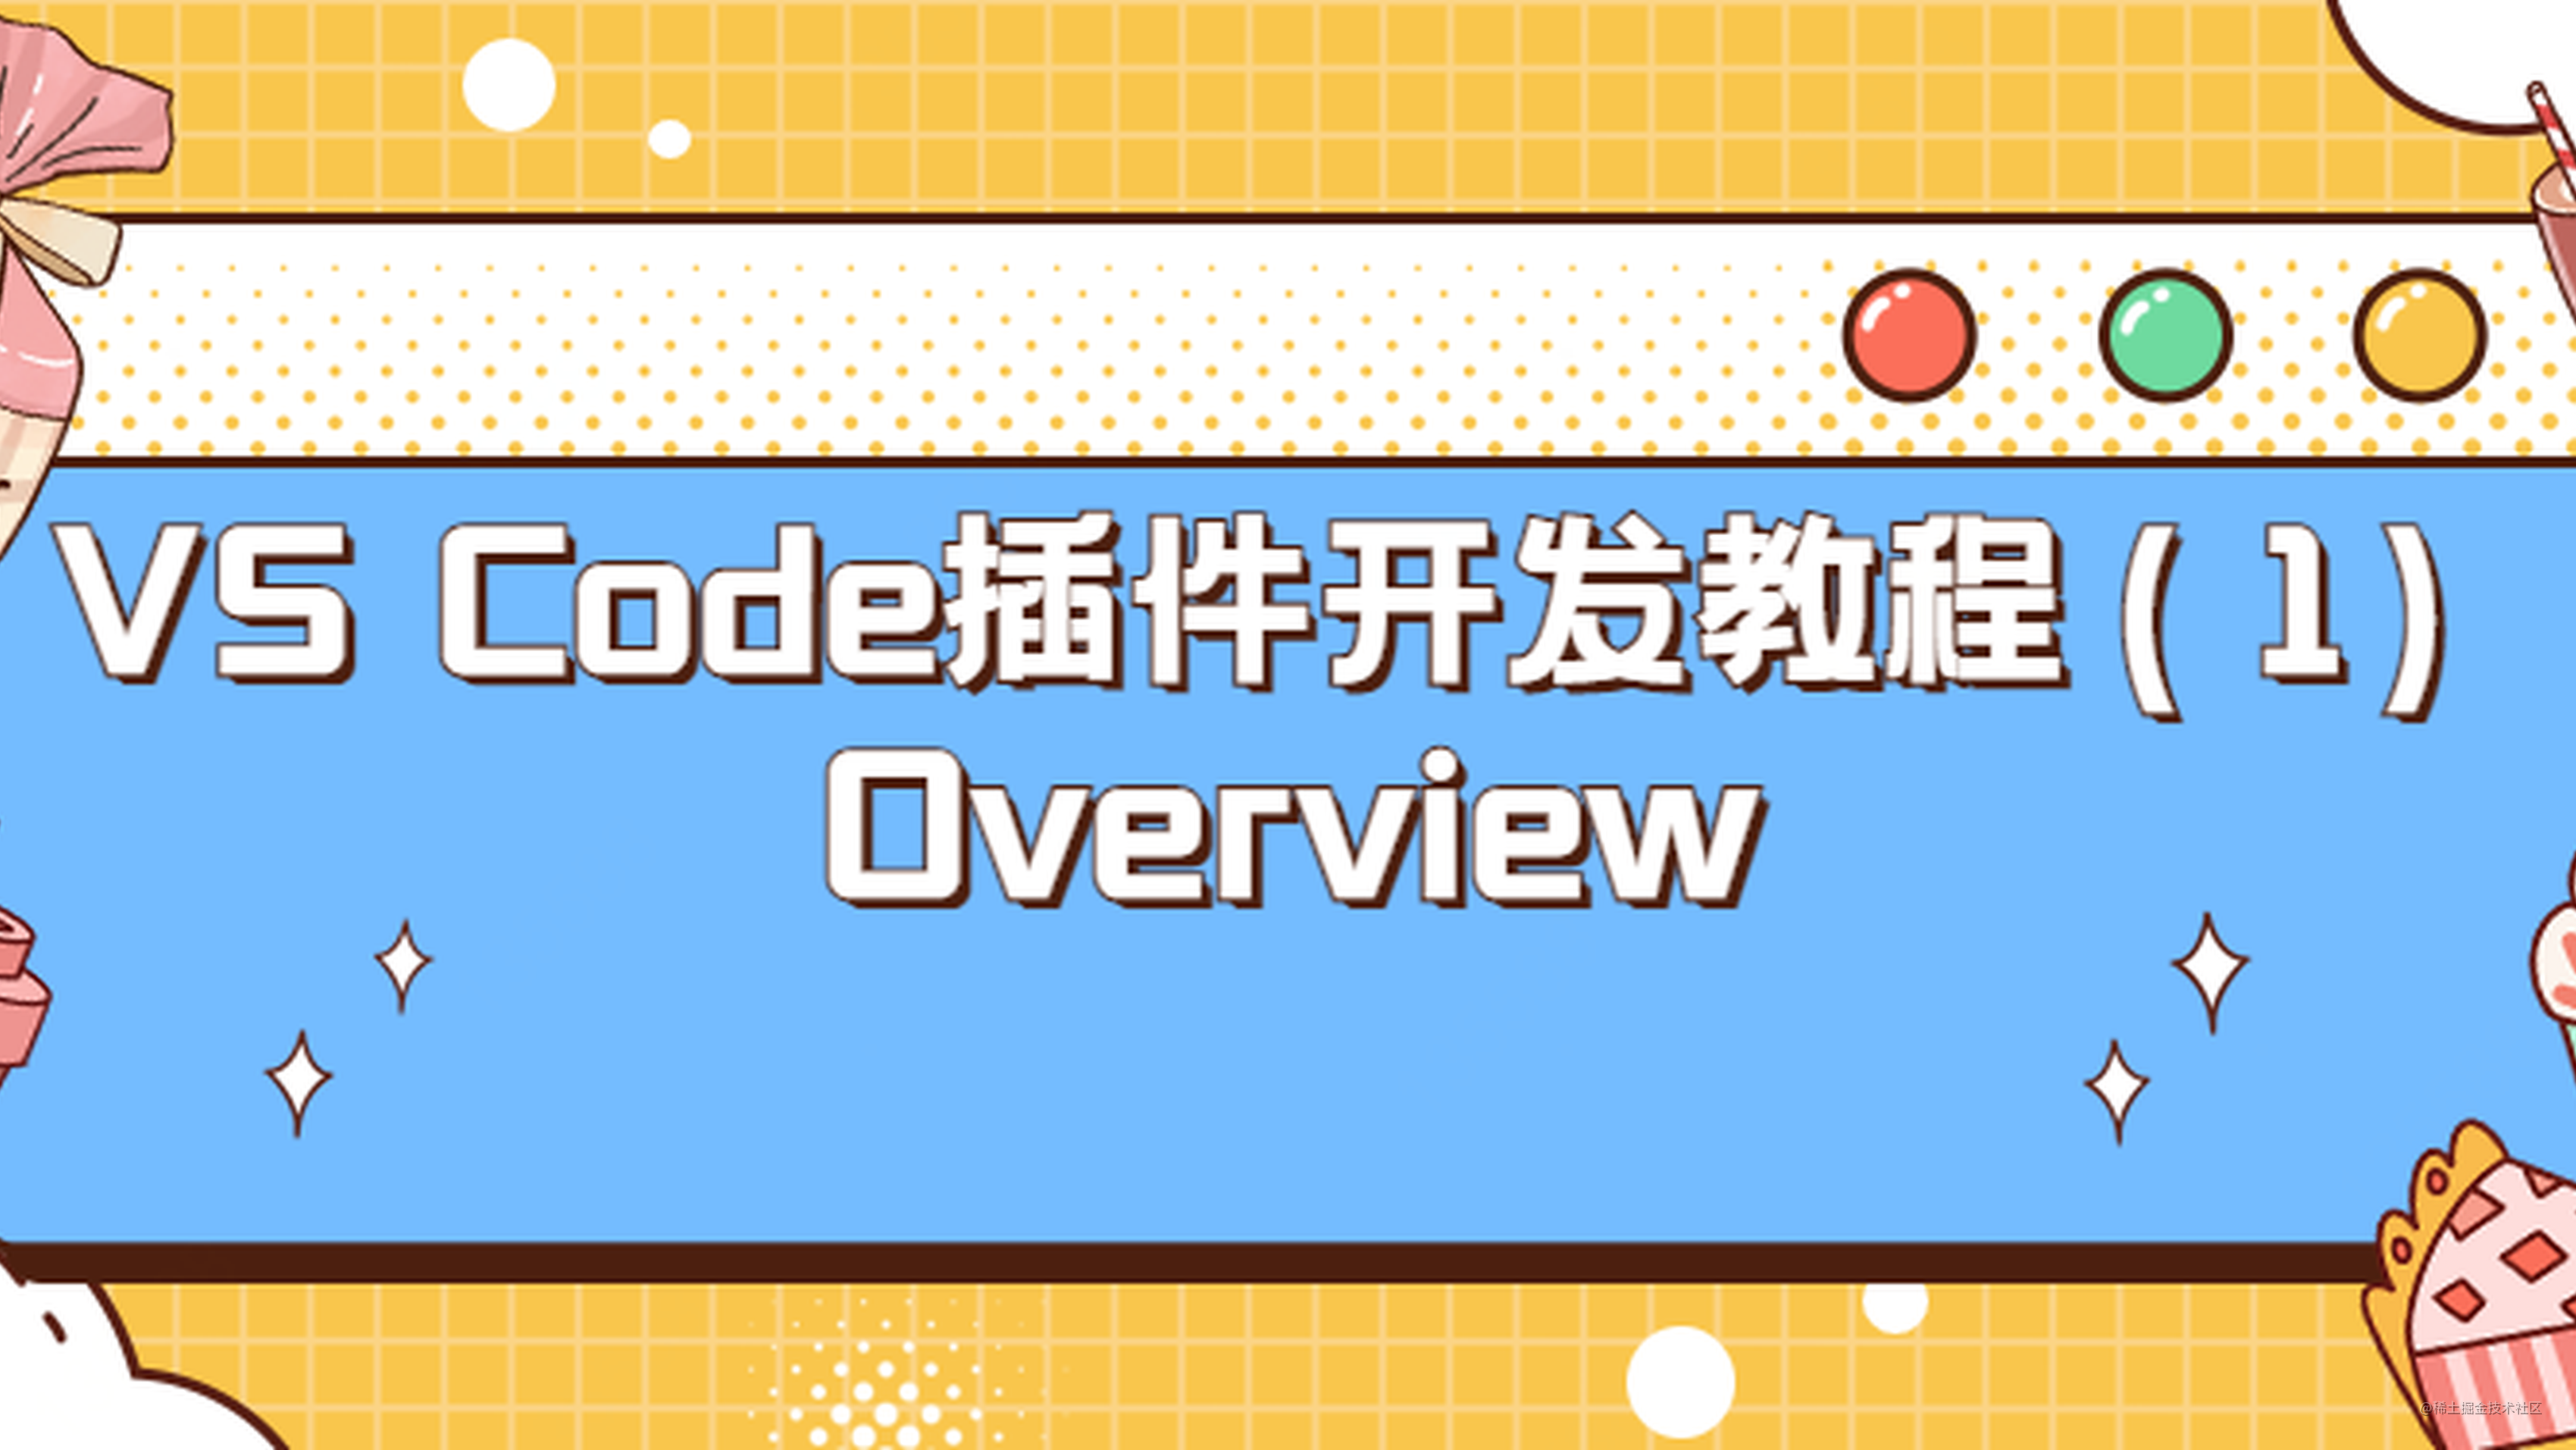 VS Code插件开发教程（1） Overview